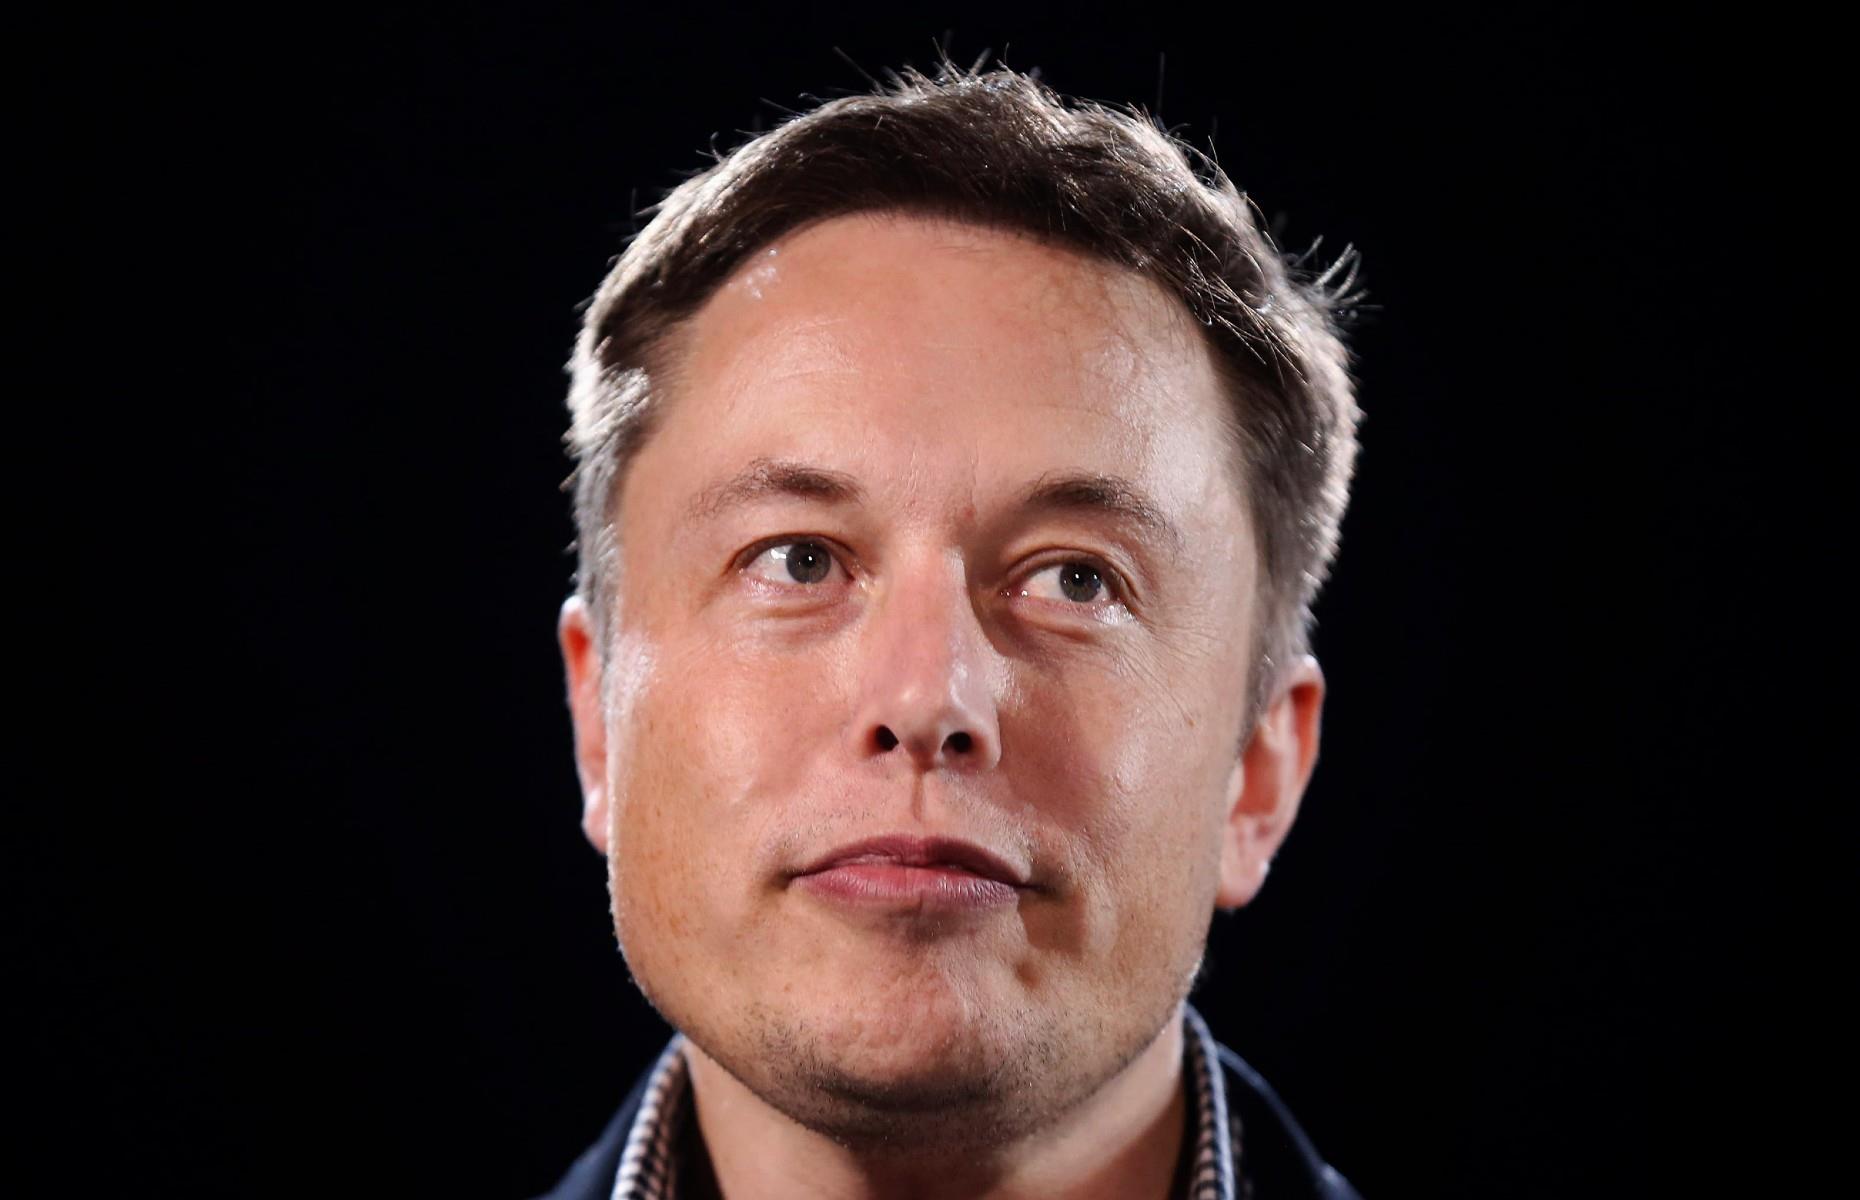 Elon Musk – possessions weigh you down 